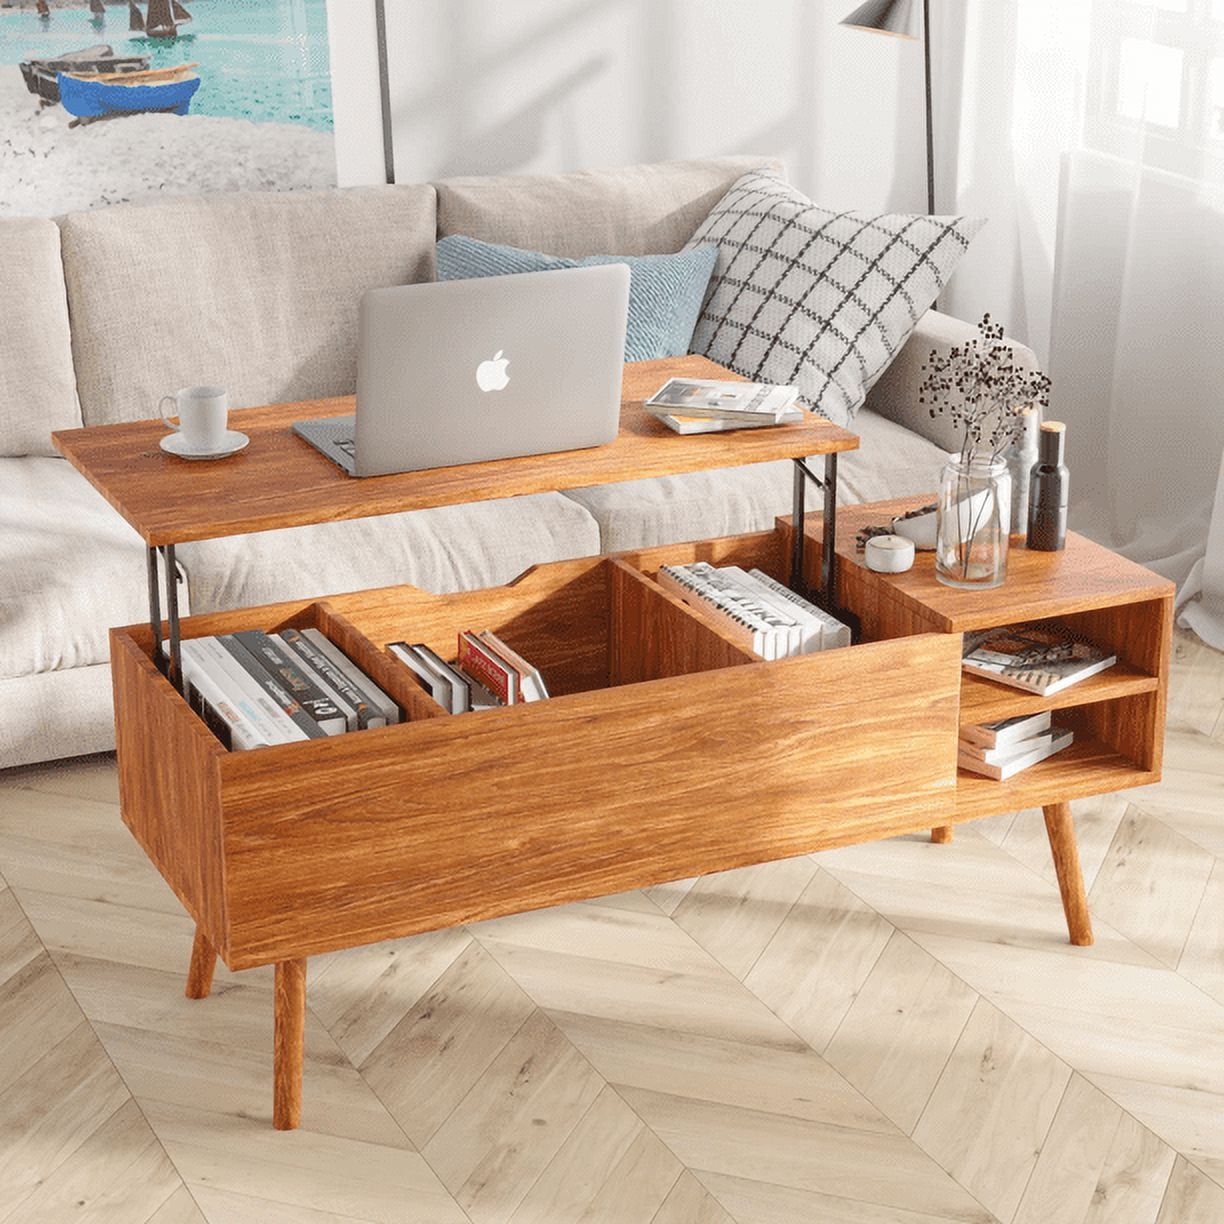 Modern Lift Top Coffee Table With Hidden Compartment Storage,Adjustable  Wood Table For Living Room,Brown – Walmart Within Lift Top Coffee Tables (View 4 of 15)